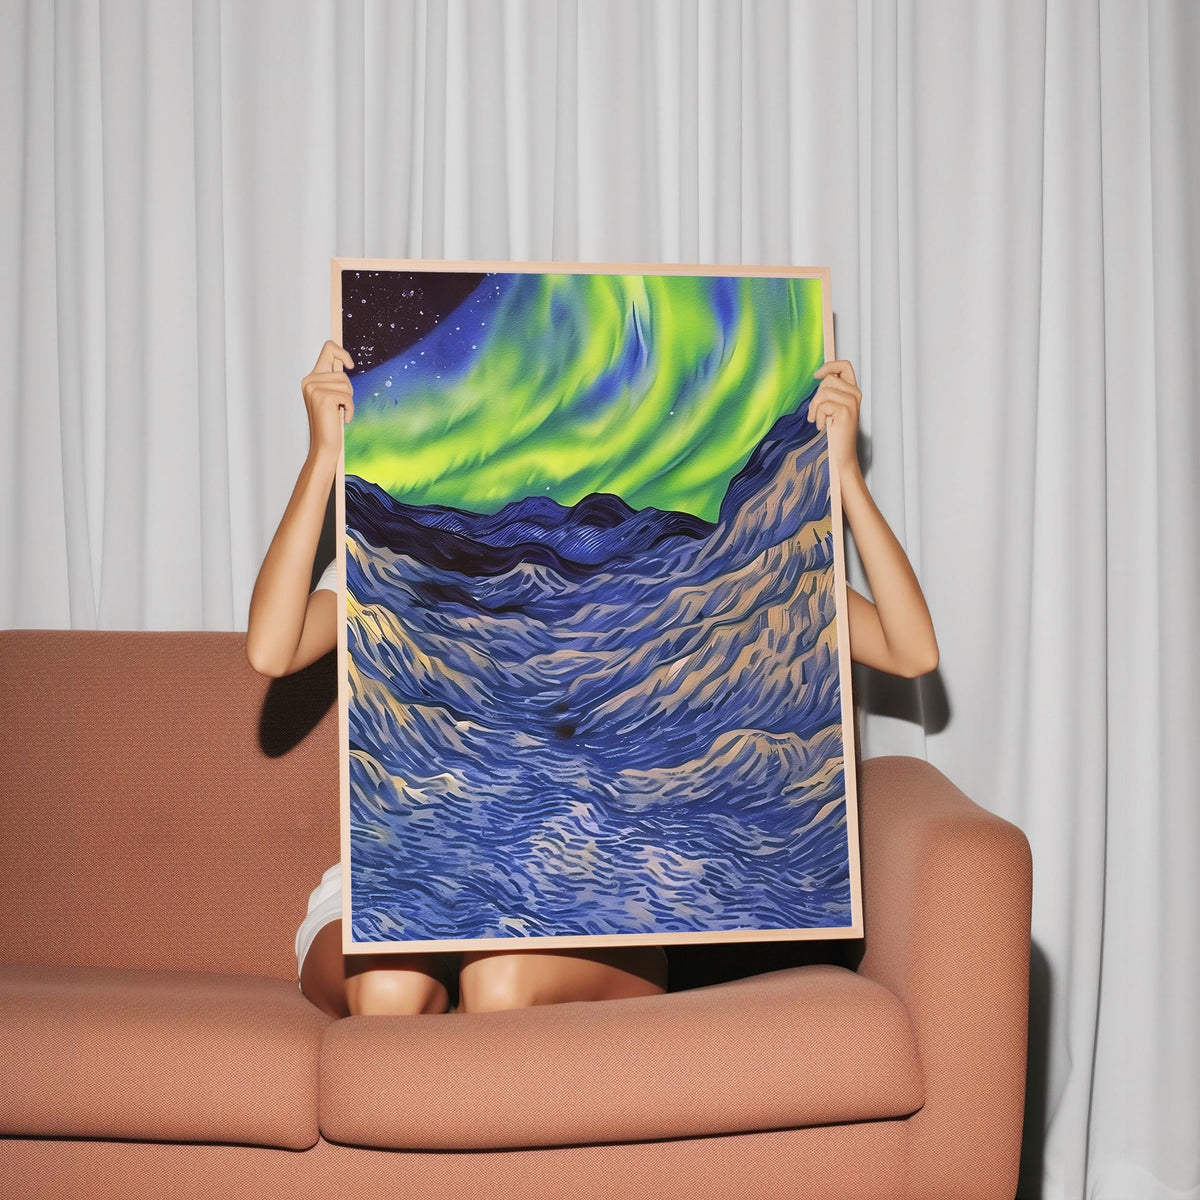 a woman sitting on a couch holding up a painting